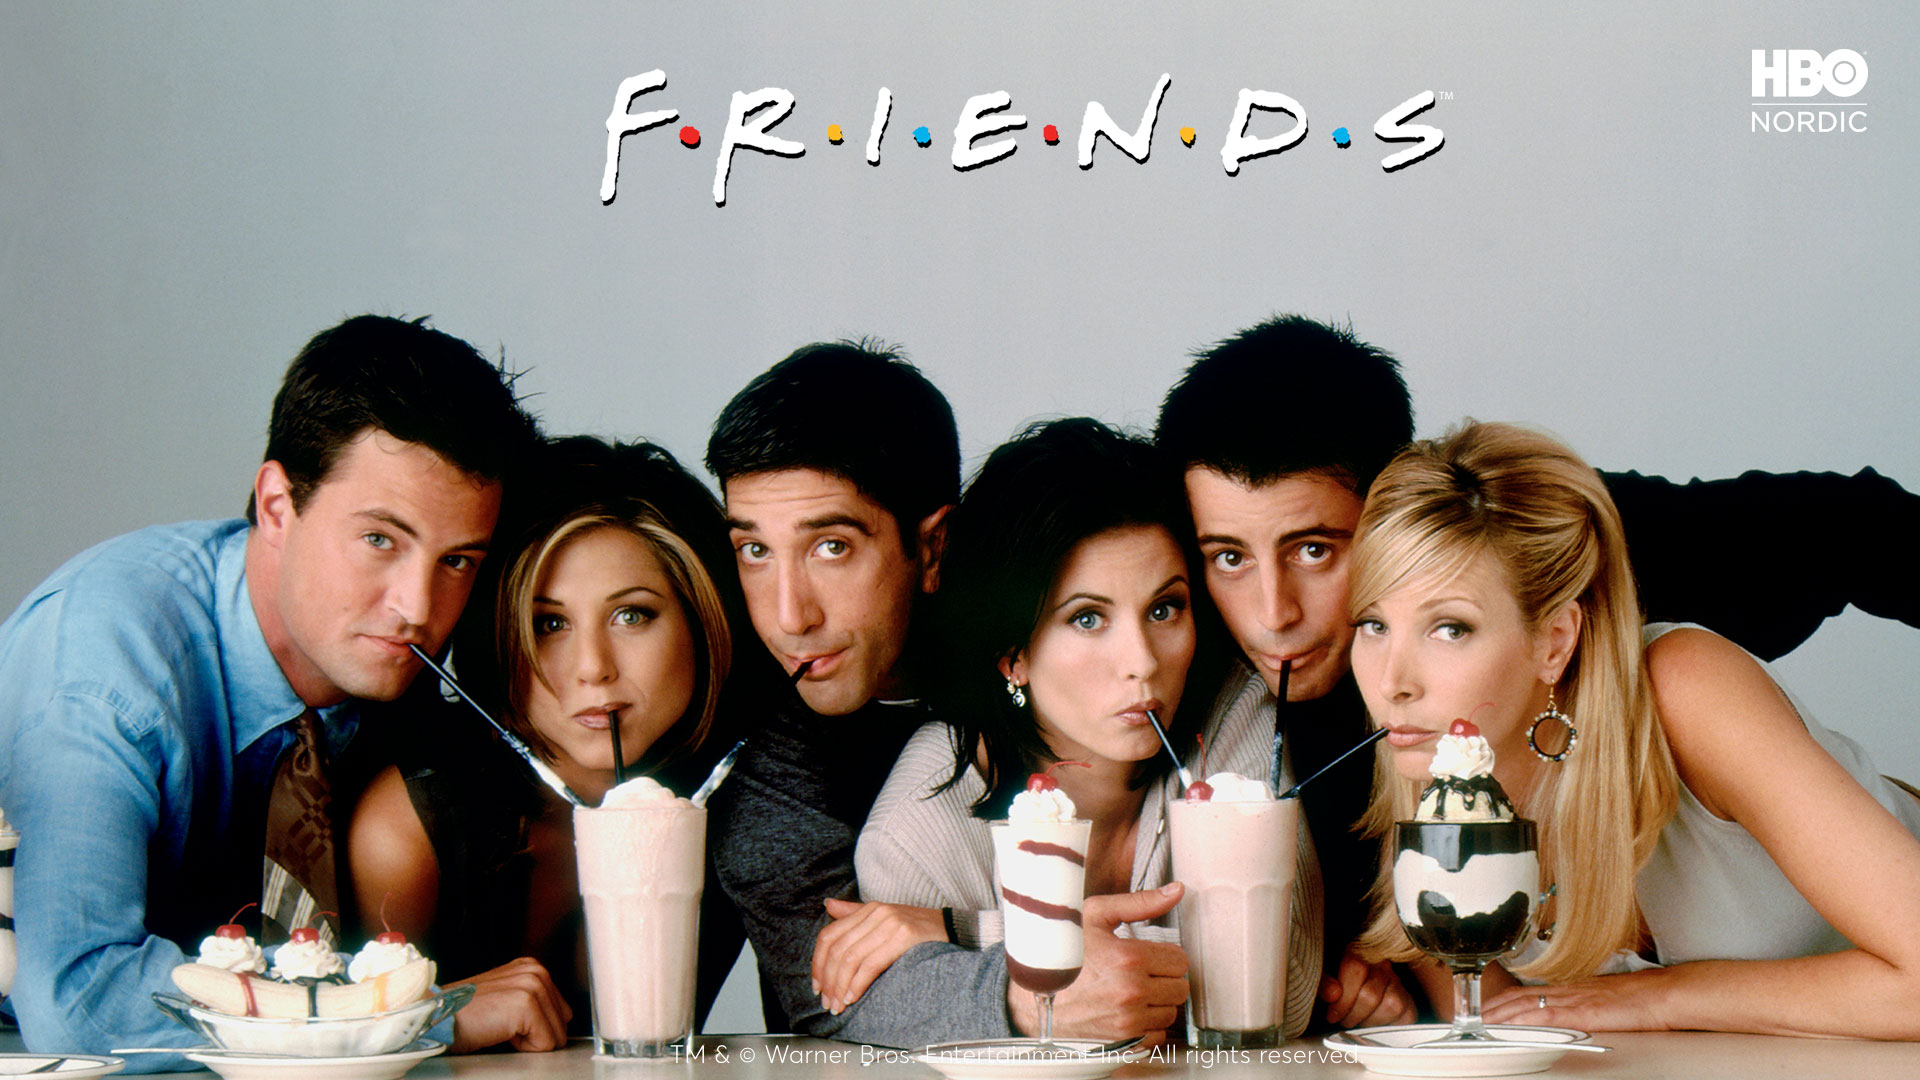 Friends-HBO-Nordic